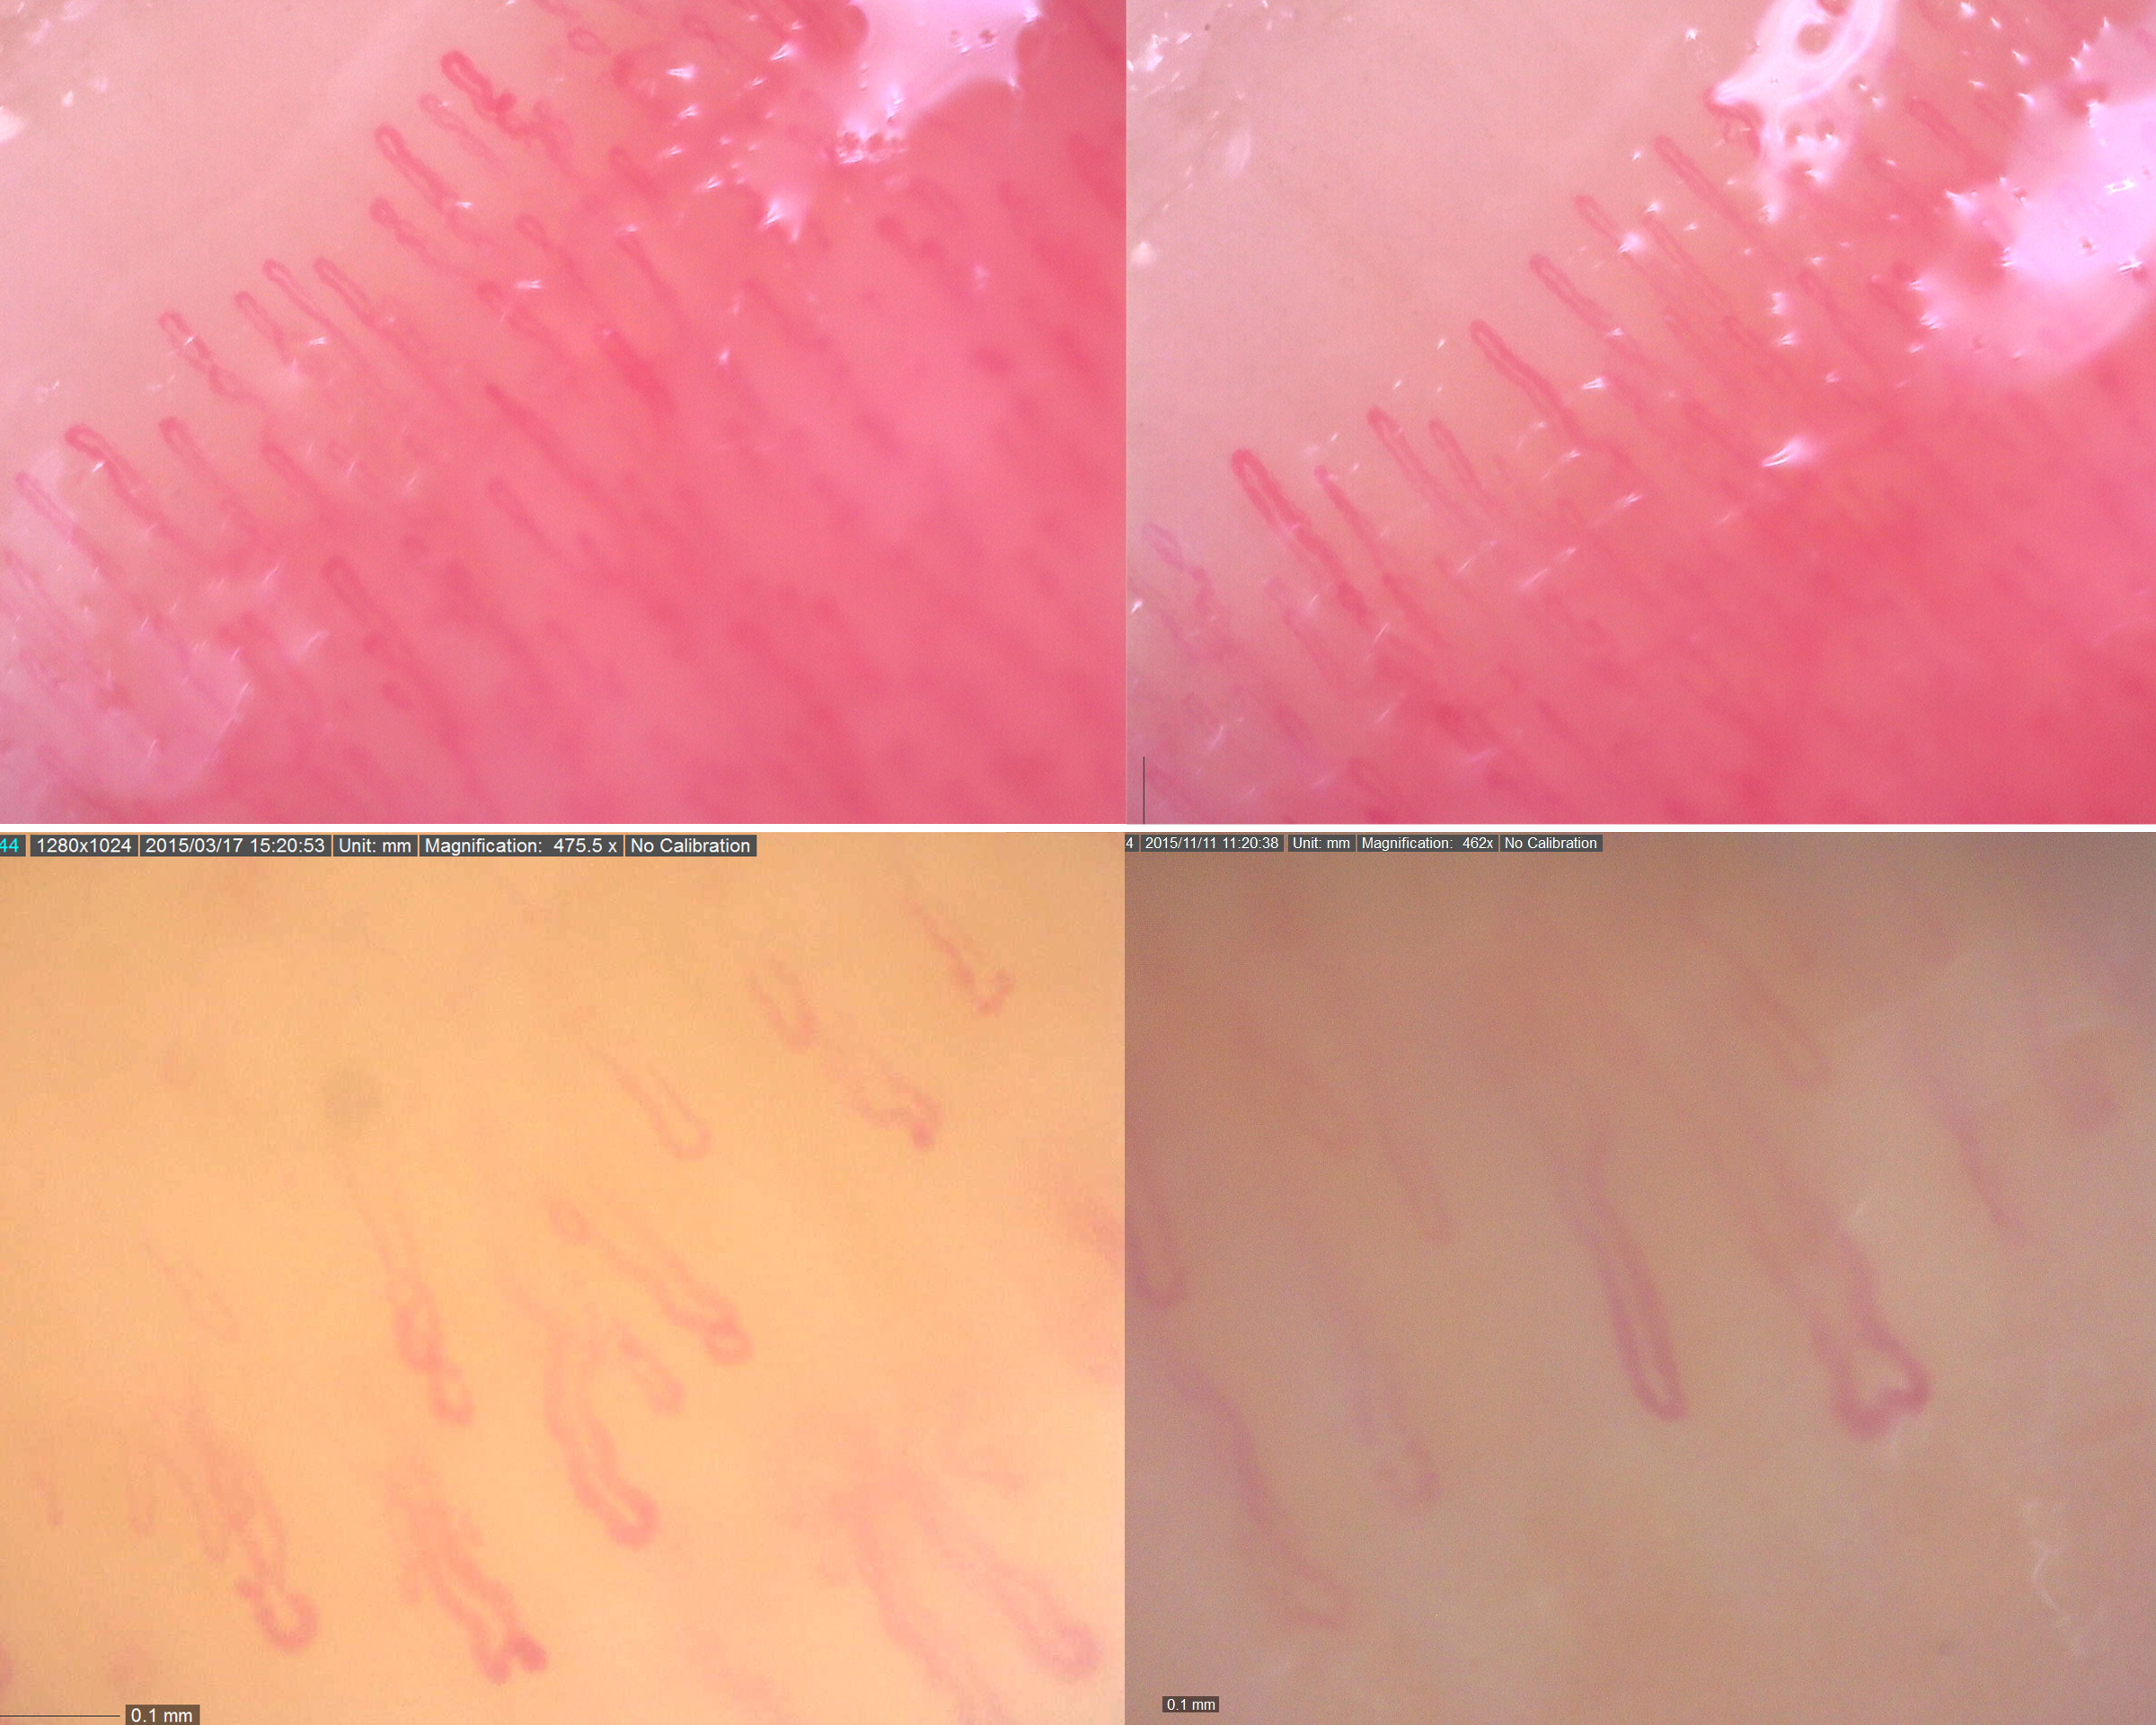 Sample images of microvasculopathy viewing capillaries with a Dino-Lite Capillaroscope to identify various connective tissue diseases